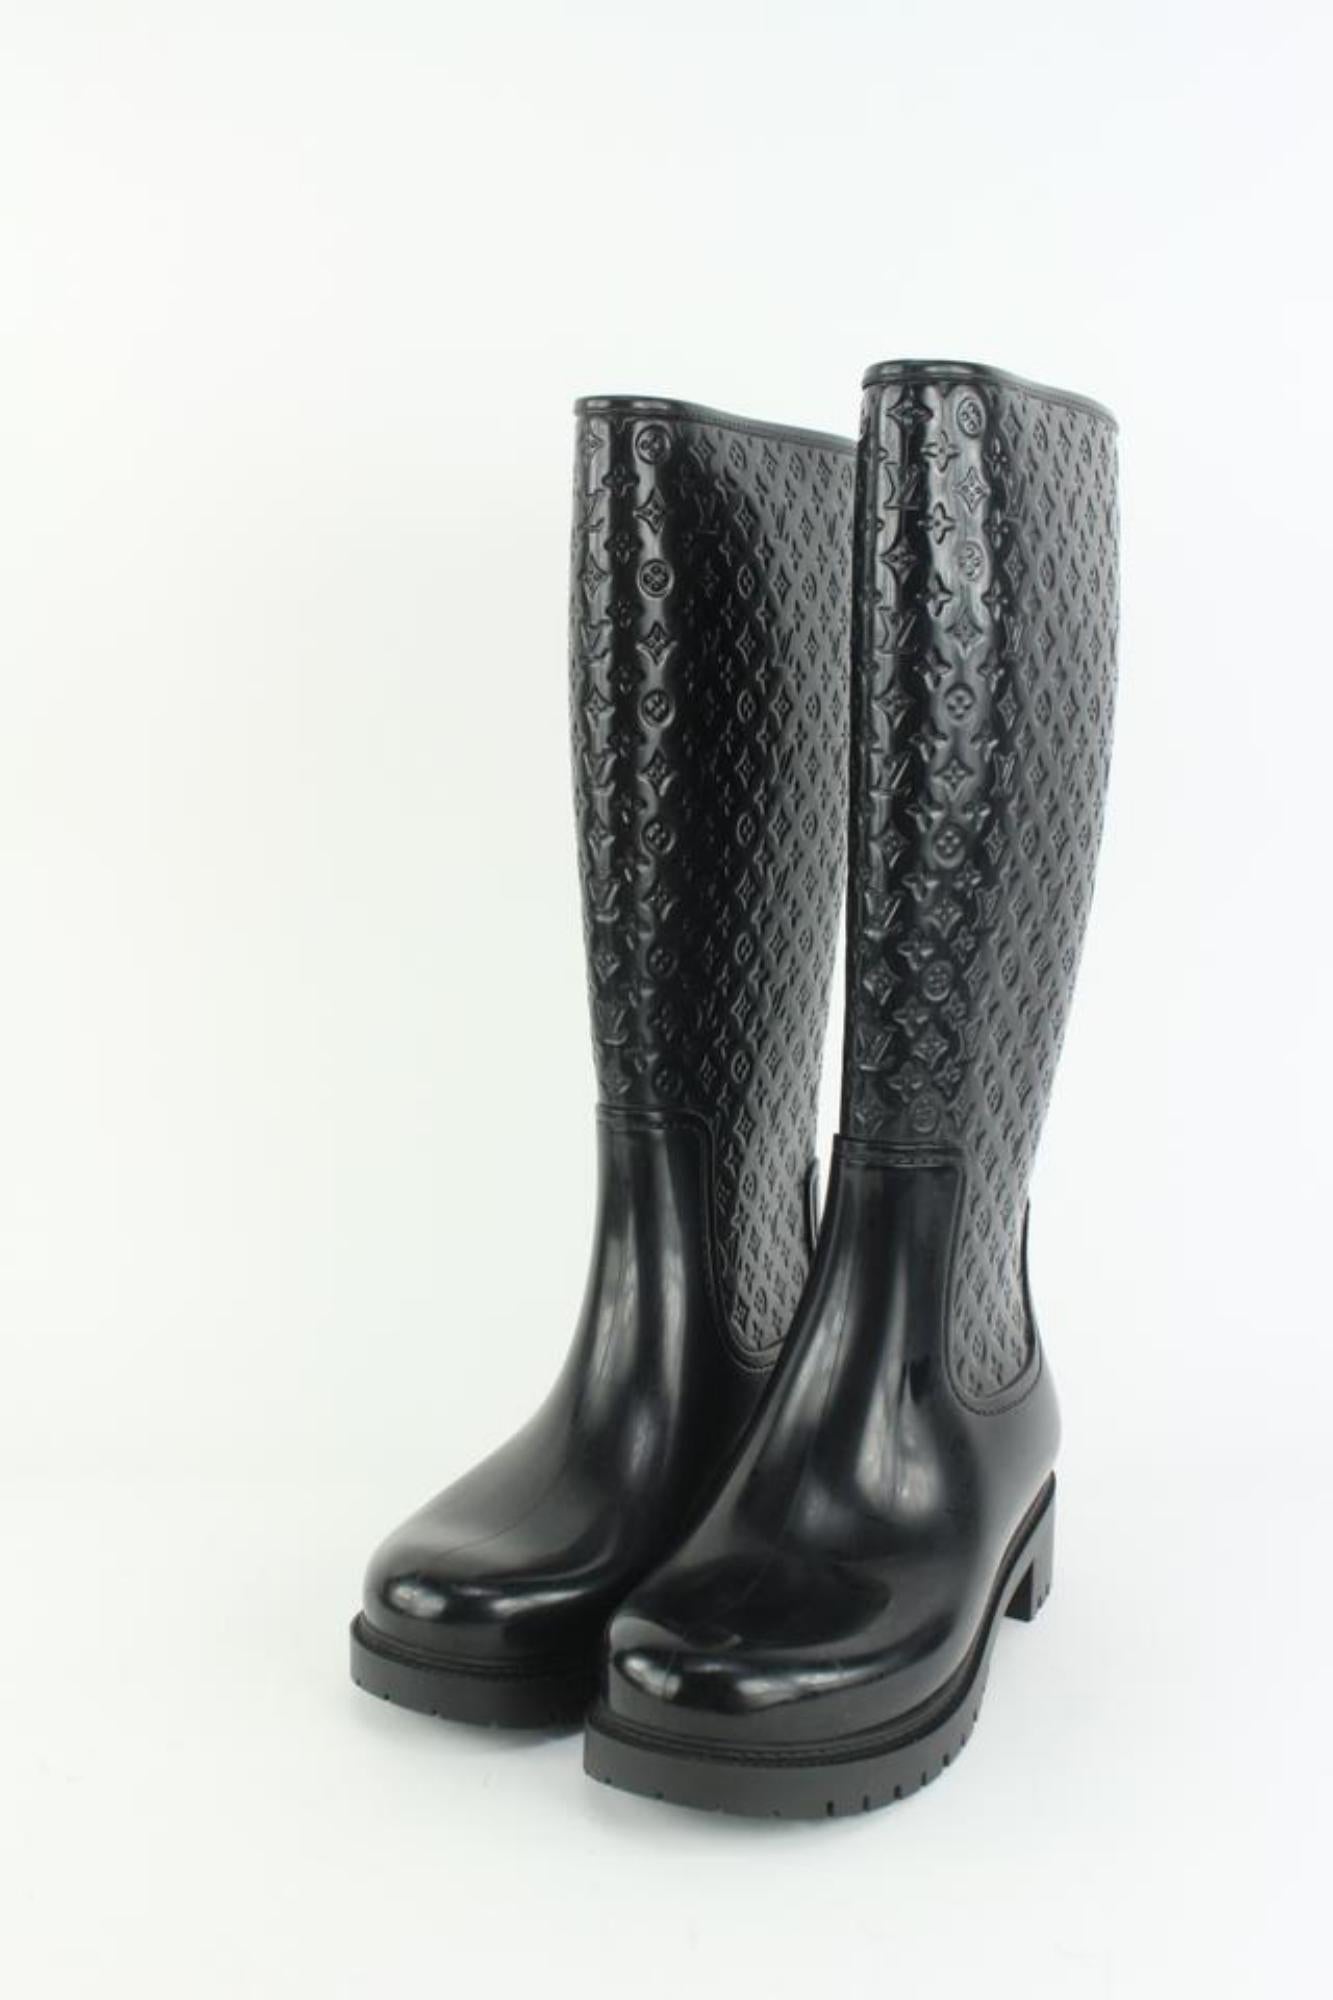 Louis Vuitton Women's 36 Black Rubber Rainboots Tall Rain Boots 9L1221
Made In: Italy
Measurements: Length:  9.75